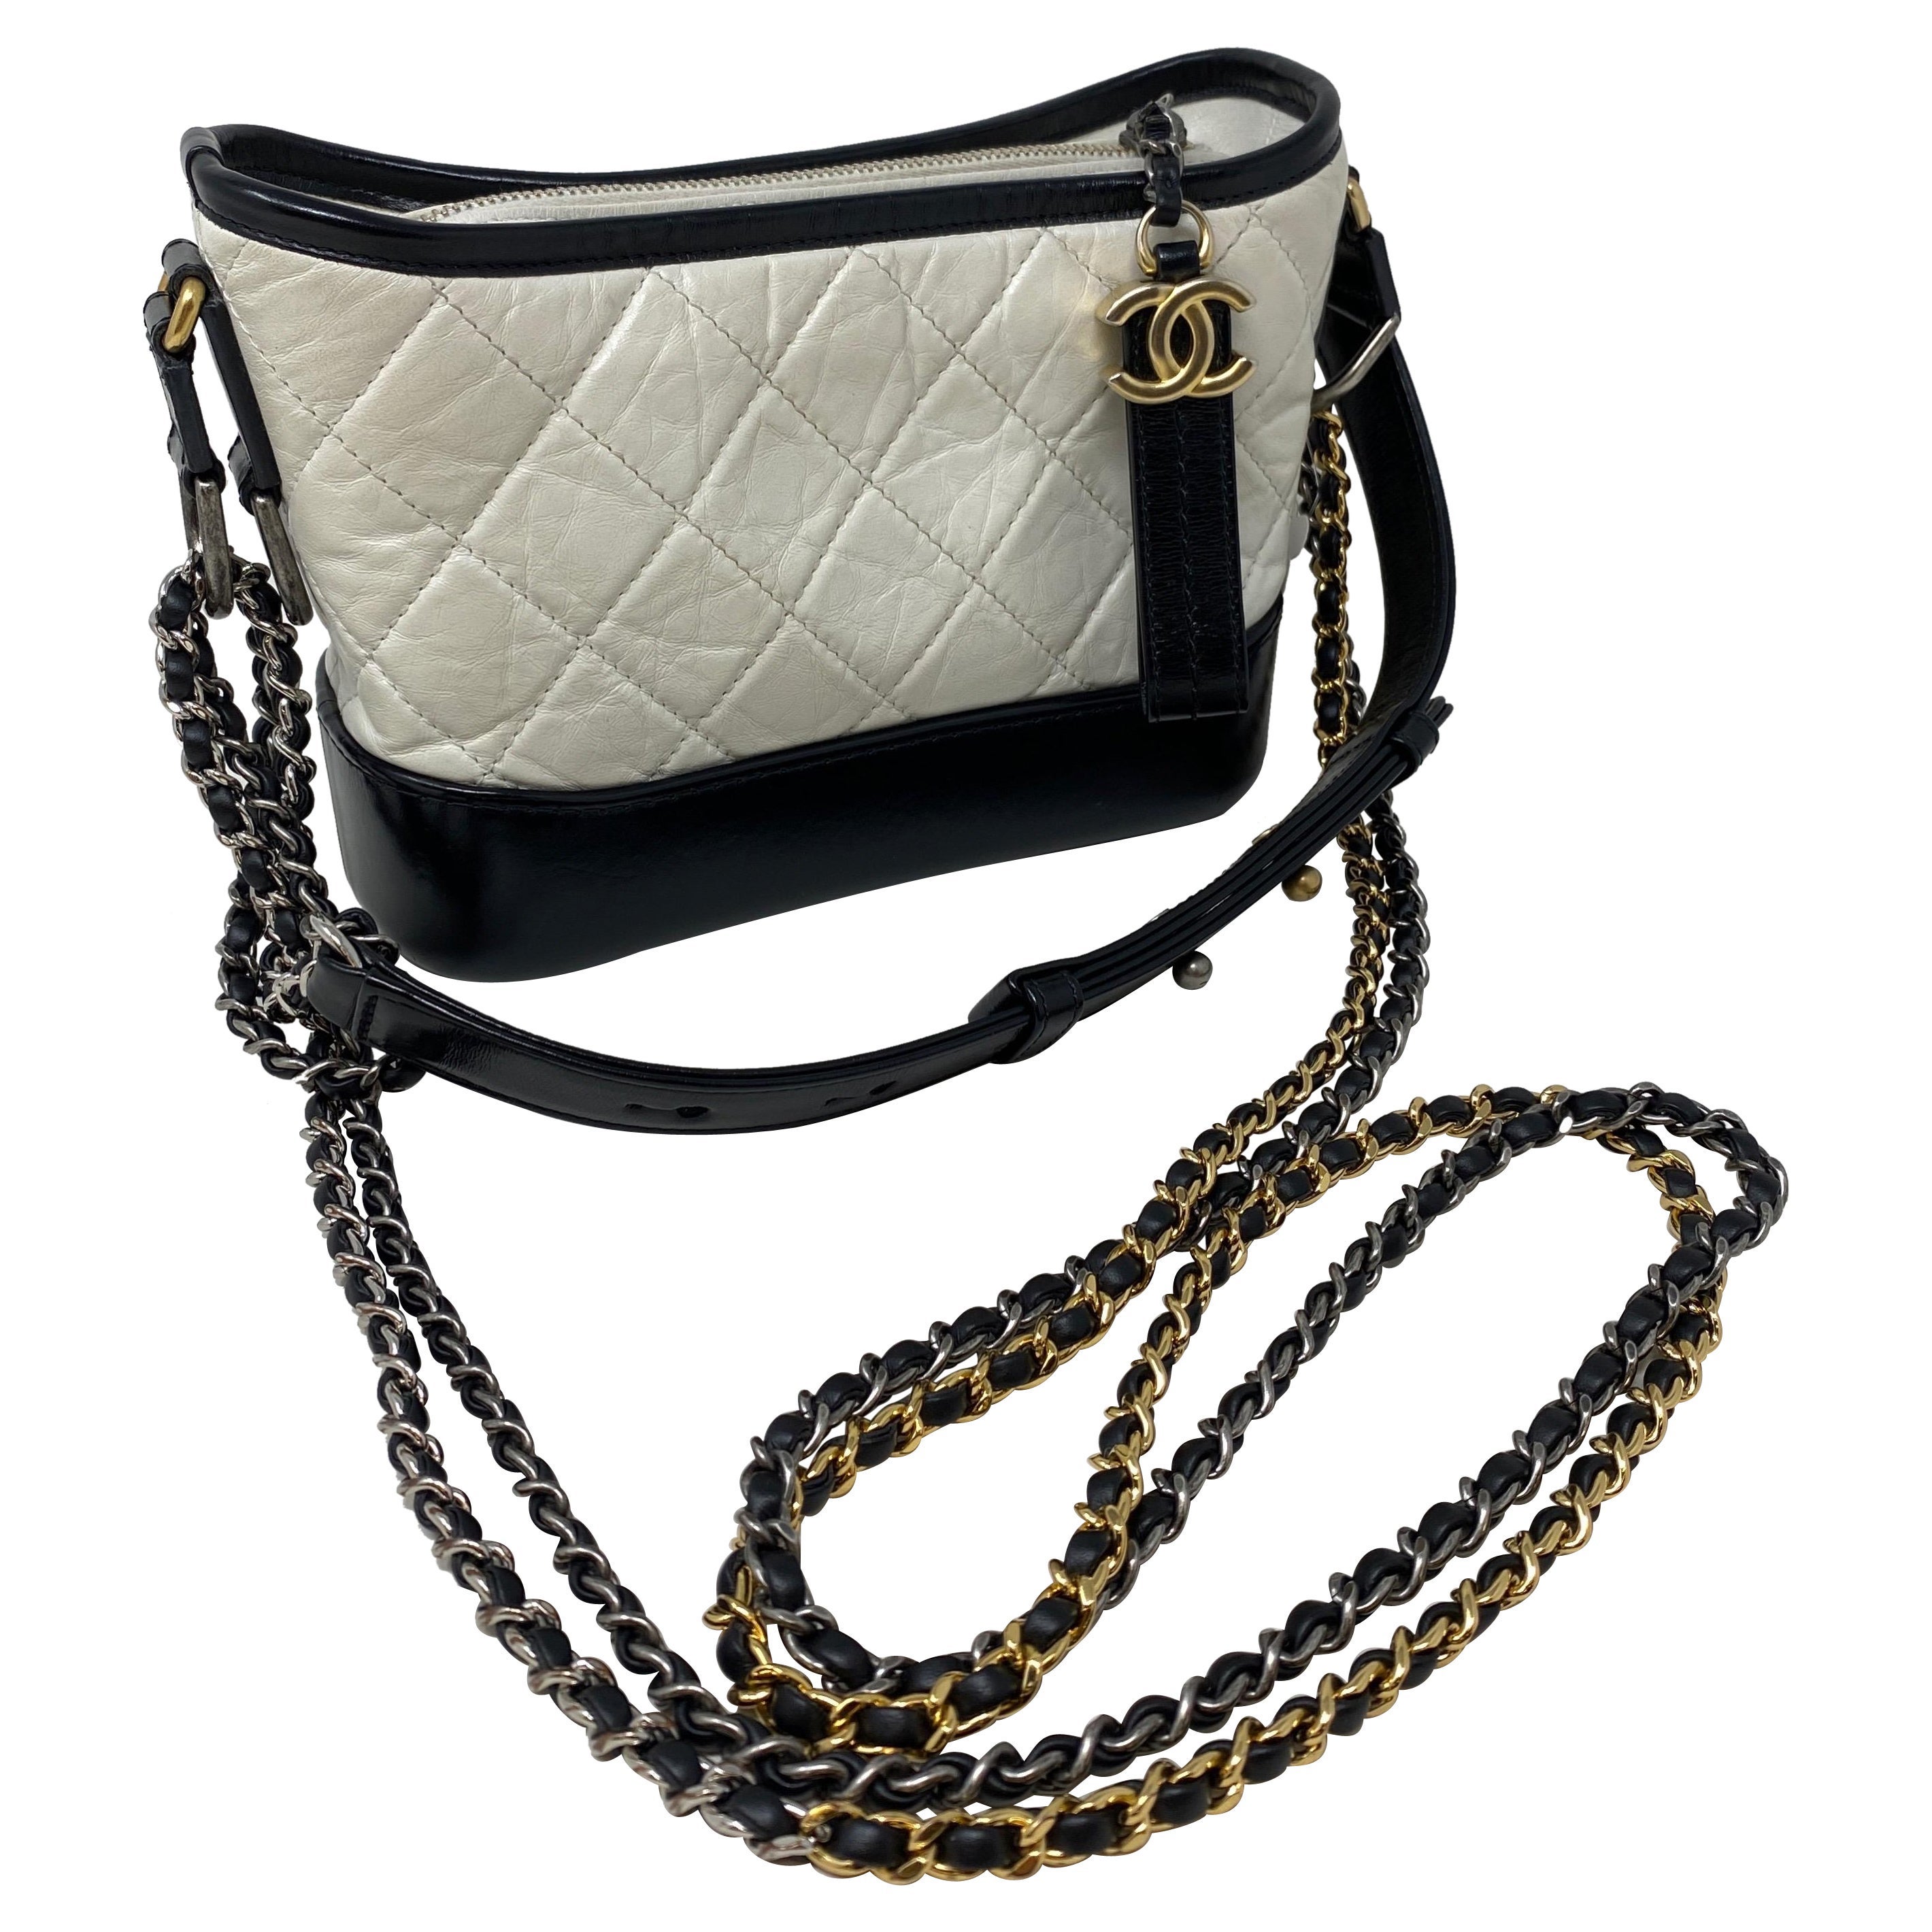 Chanel White and Black Gabrielle Bag For Sale at 1stDibs